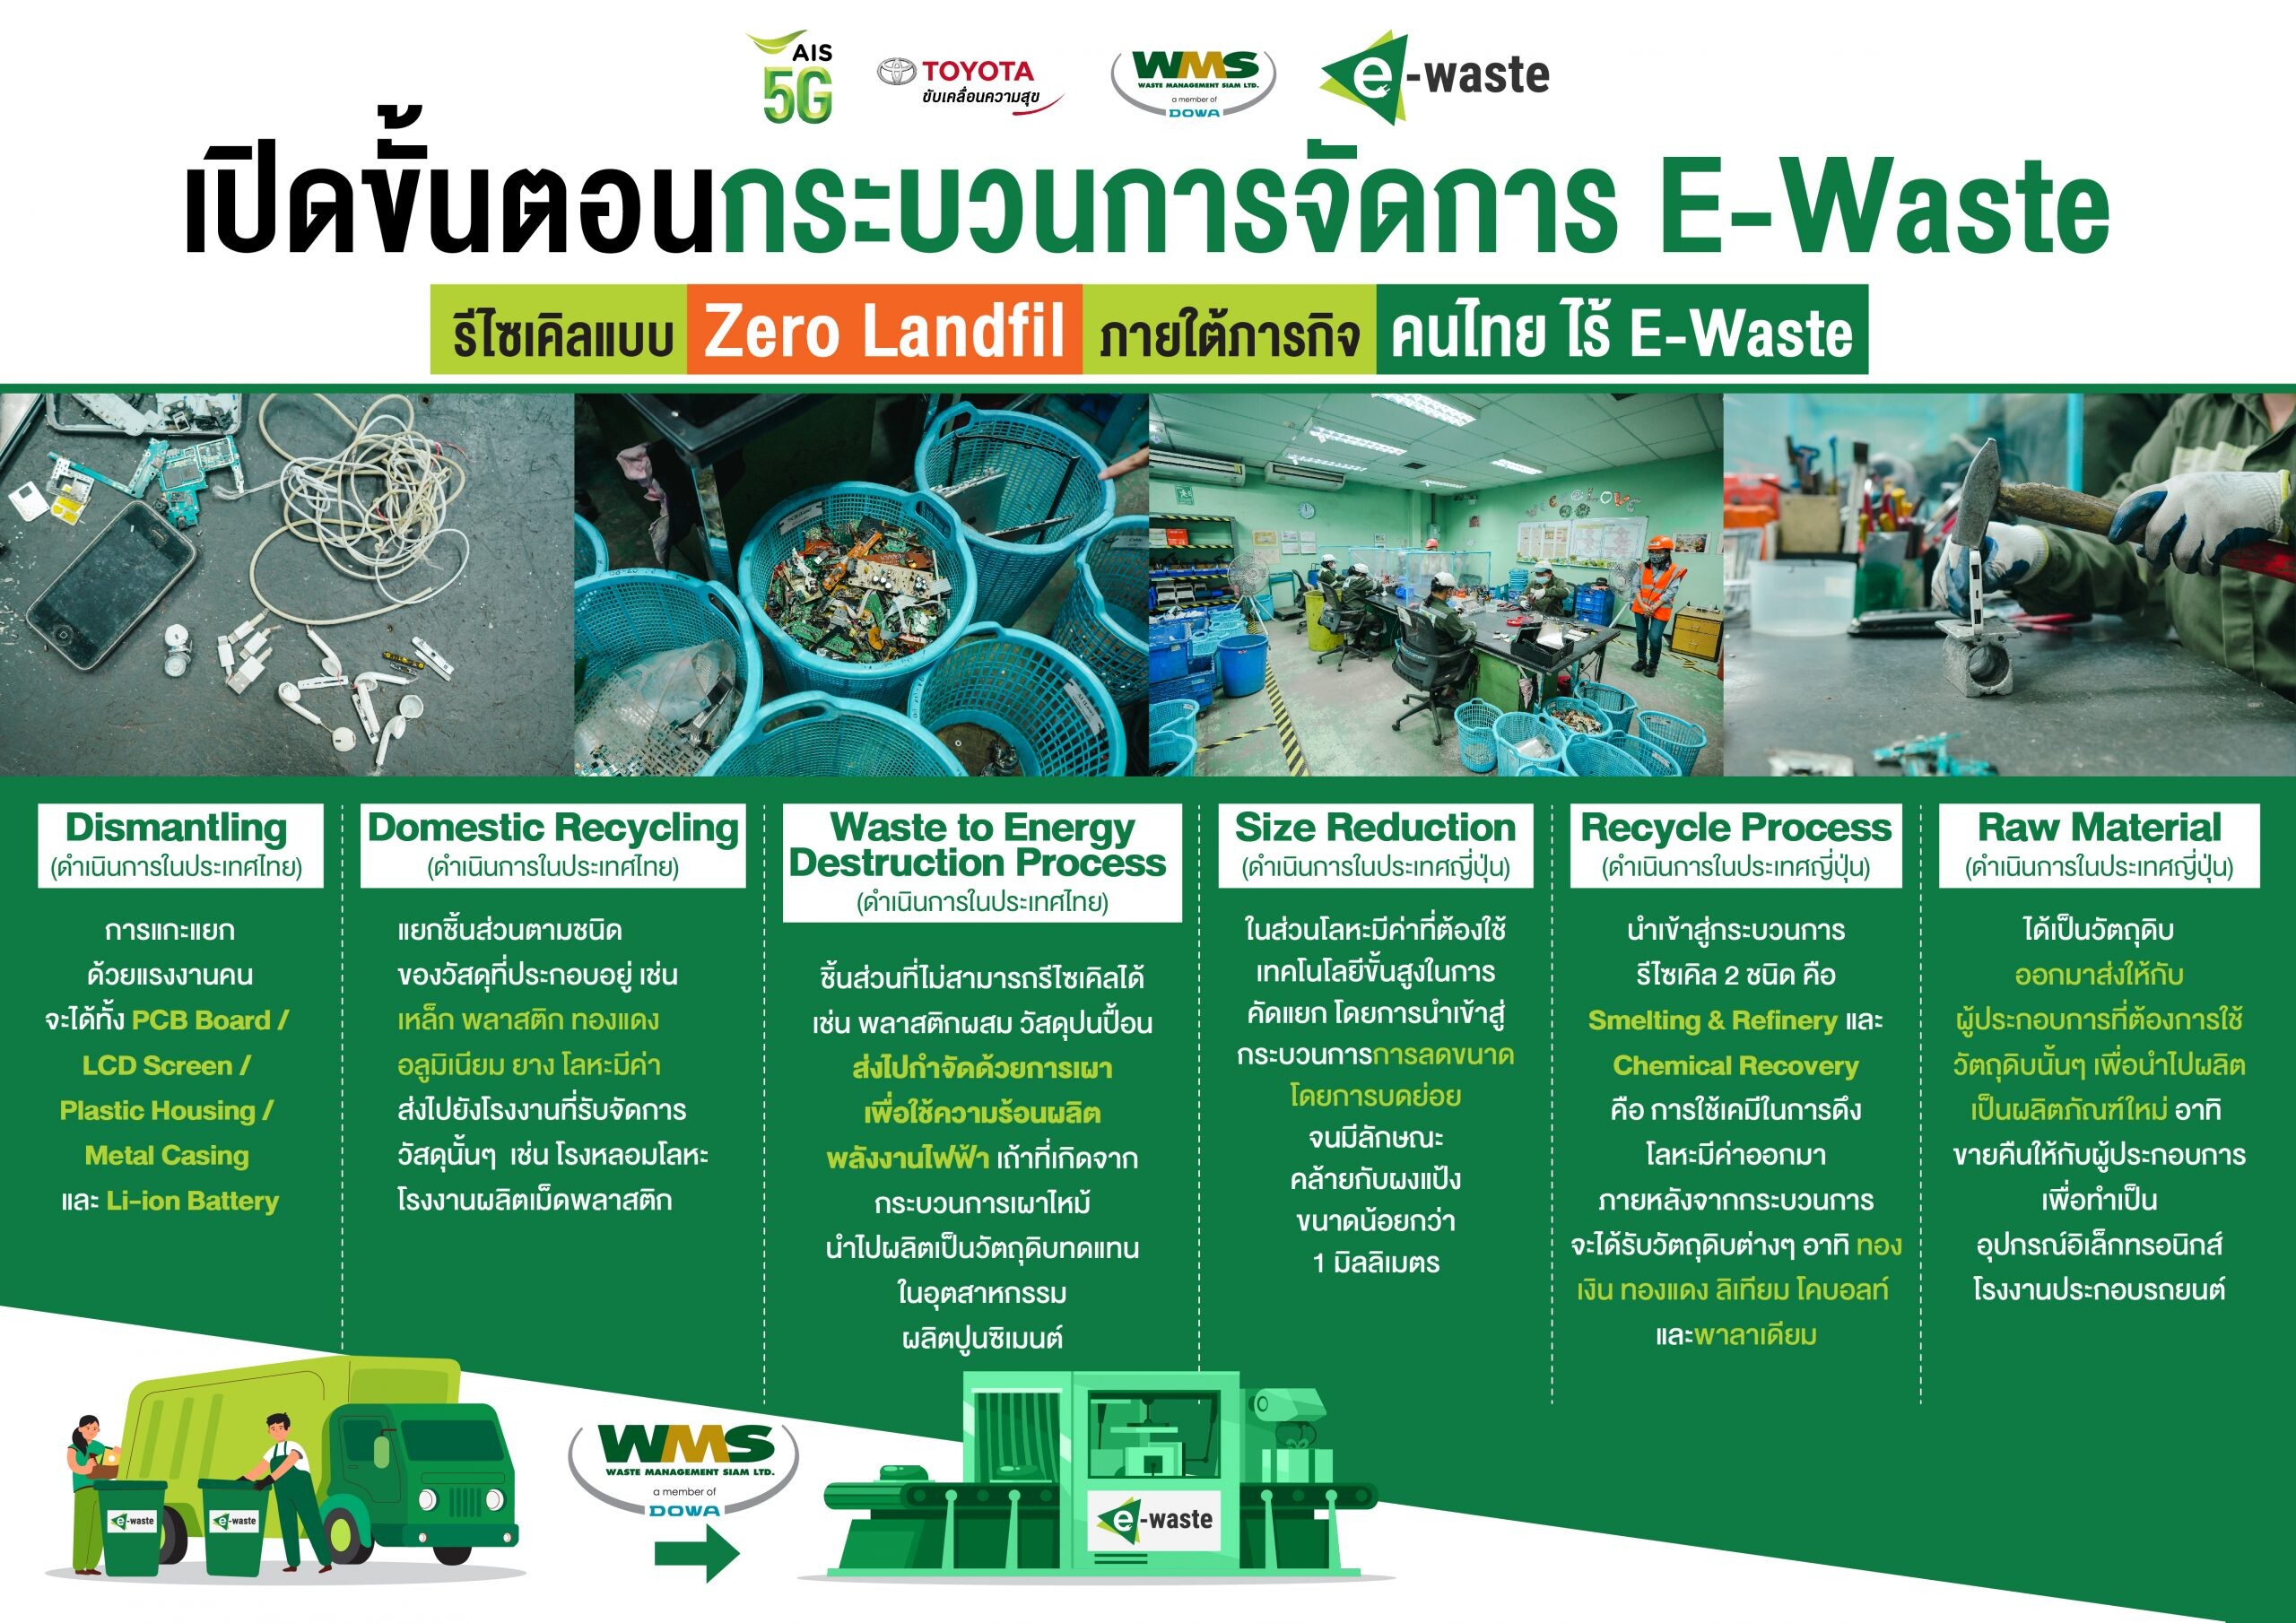 AIS teams up with TOYOTA on "Thais say no to E-Waste"